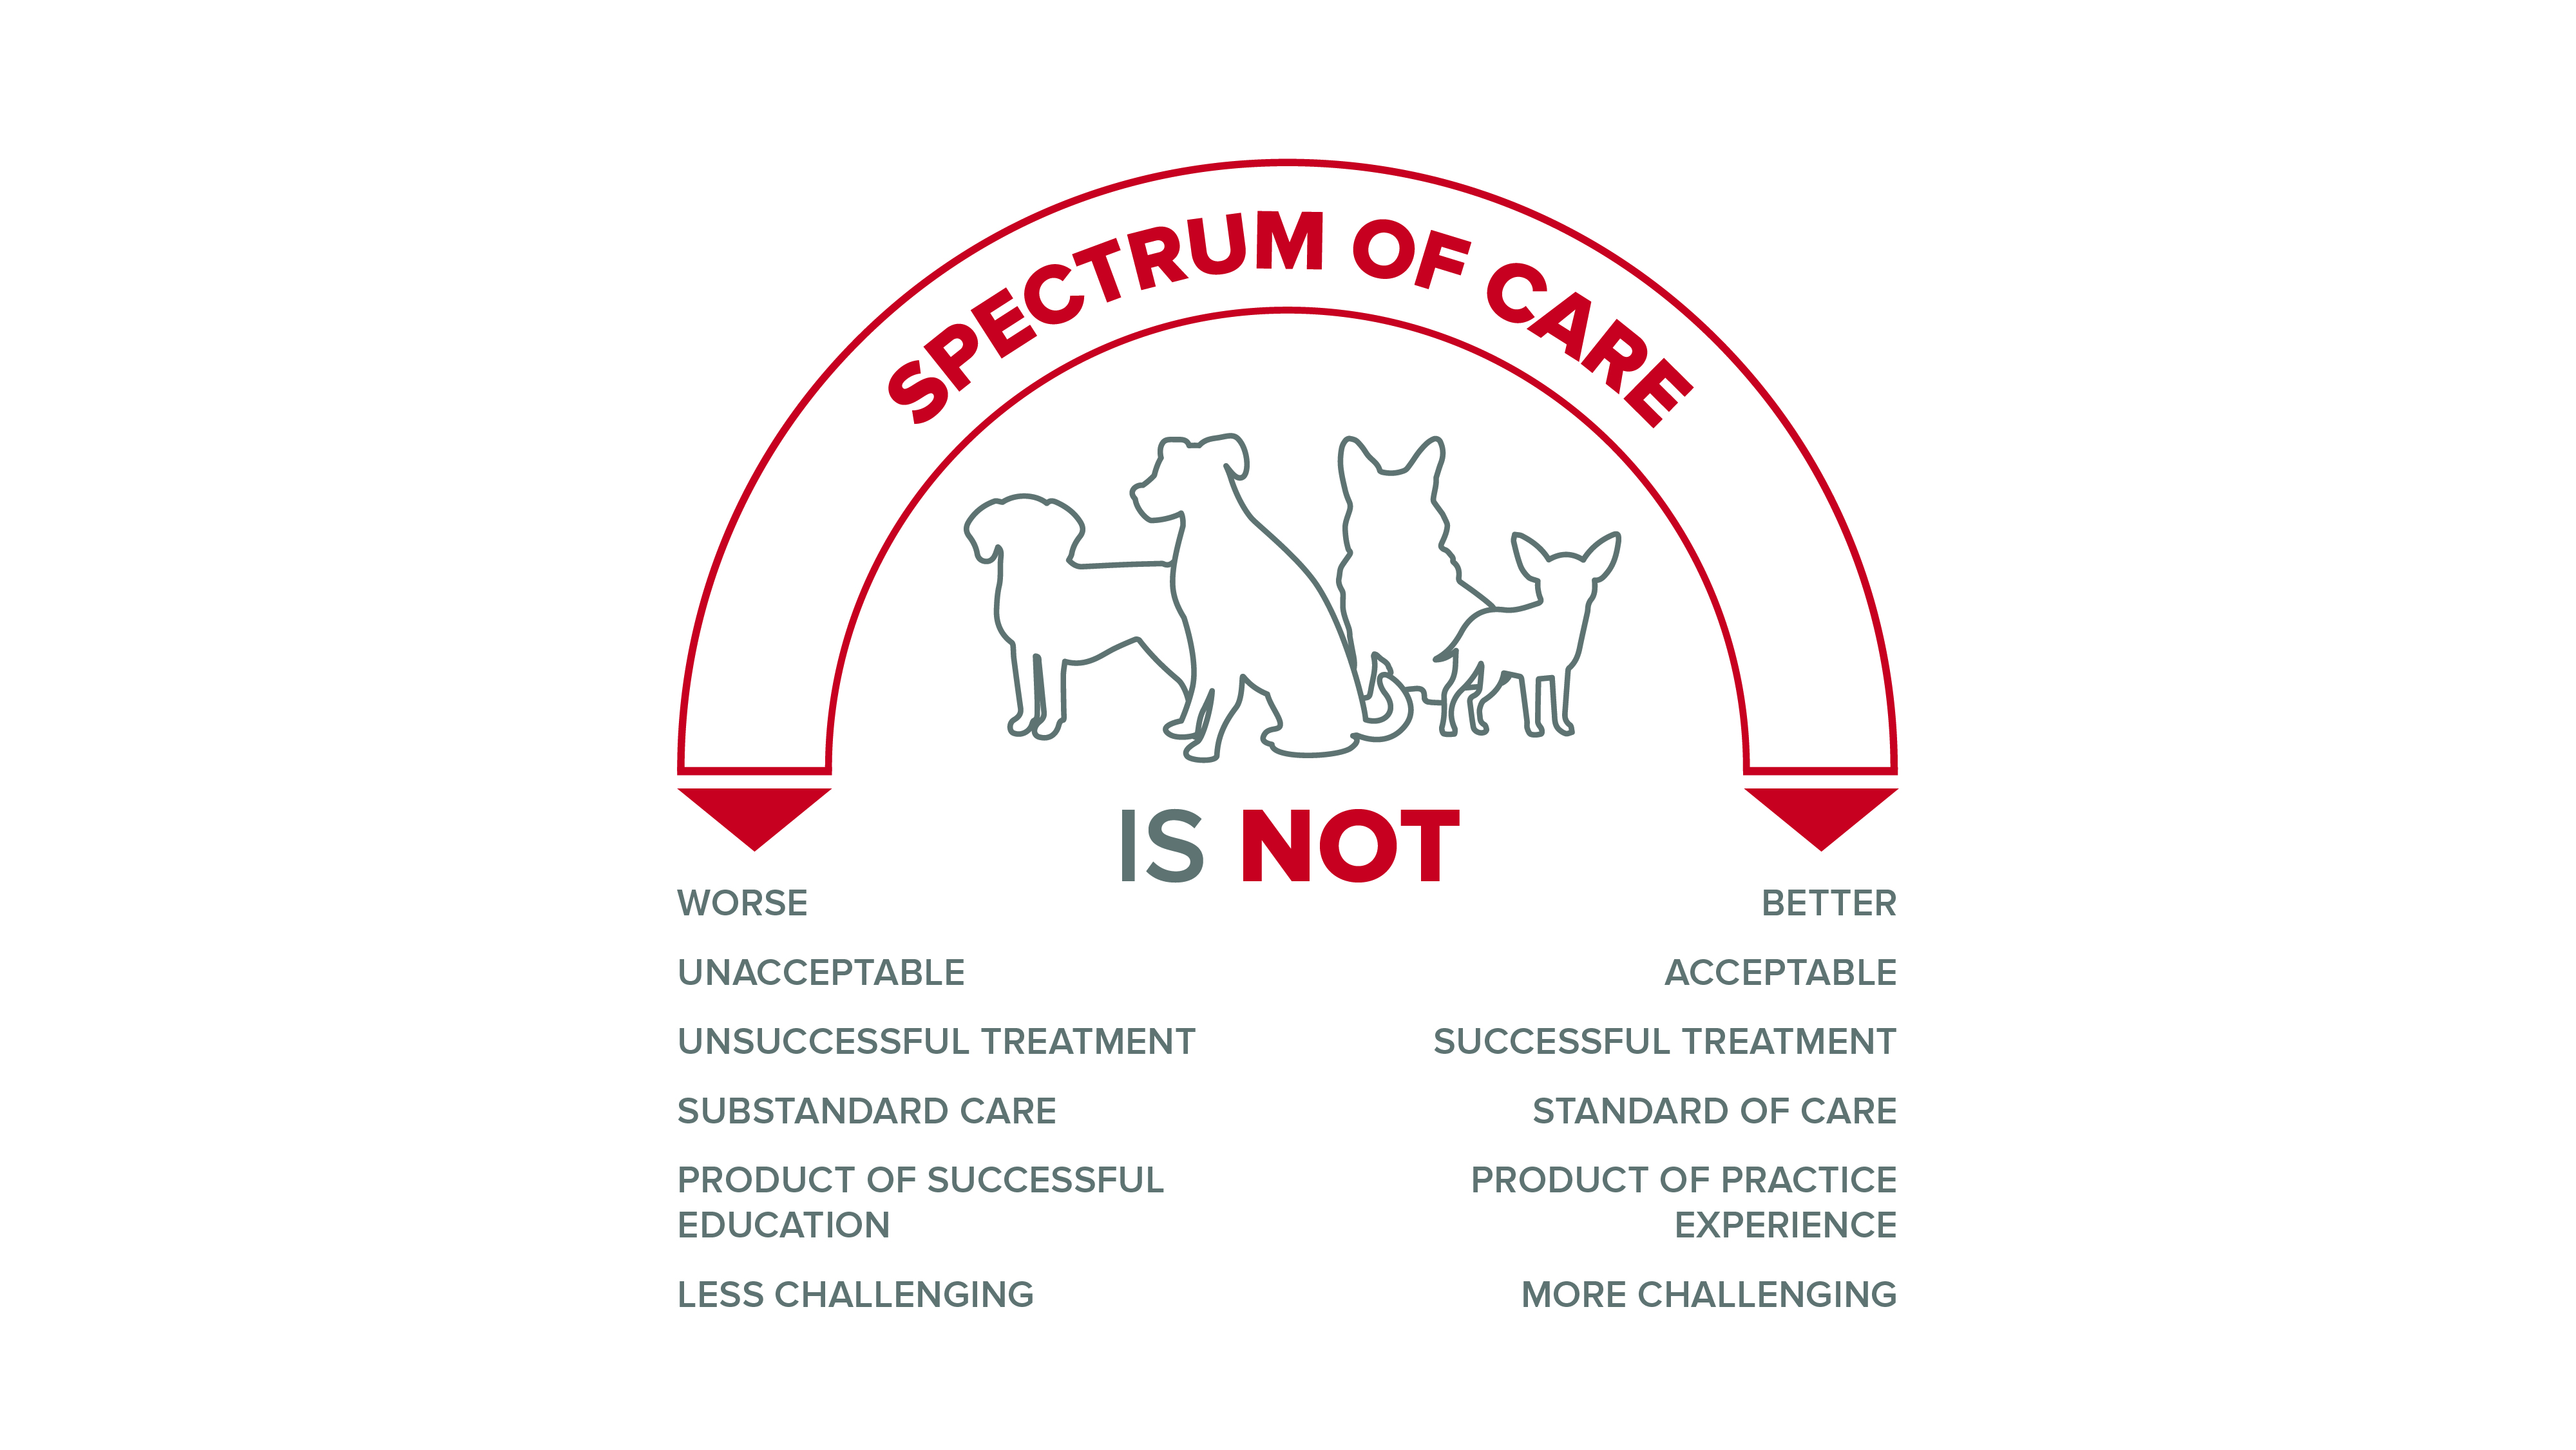 what spectrum of care is not graphic